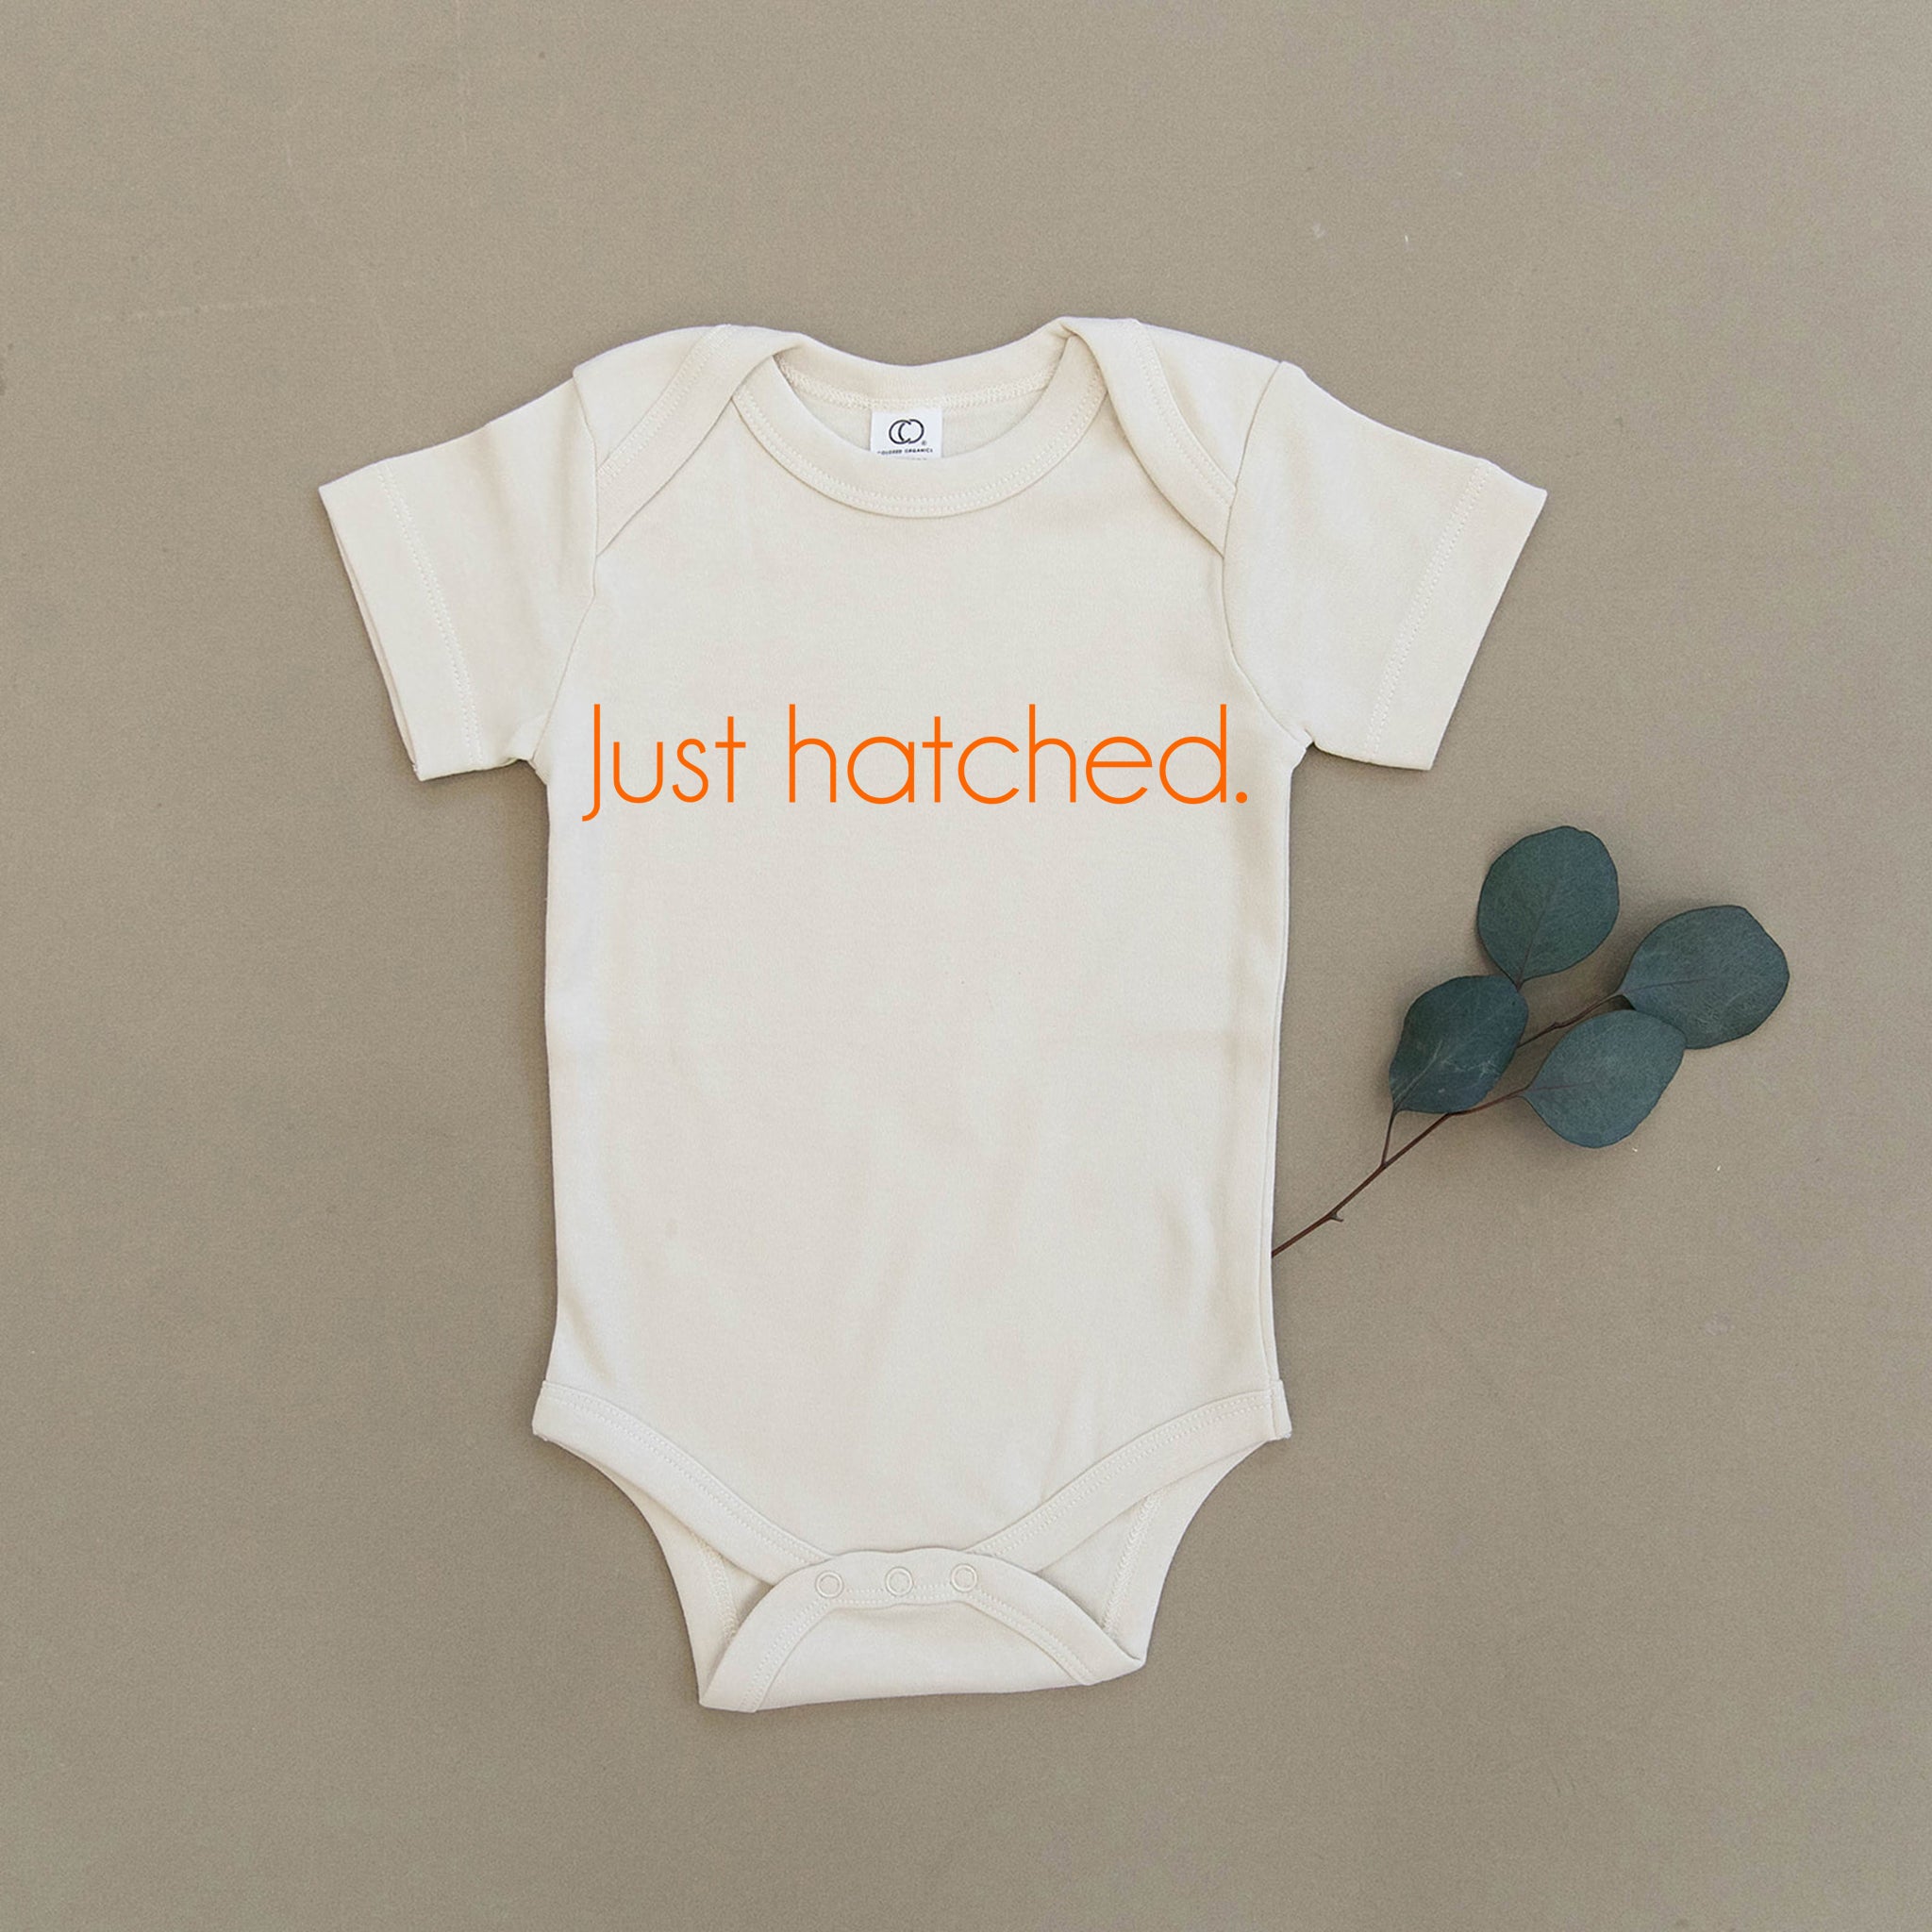 just hatched newborn outfit